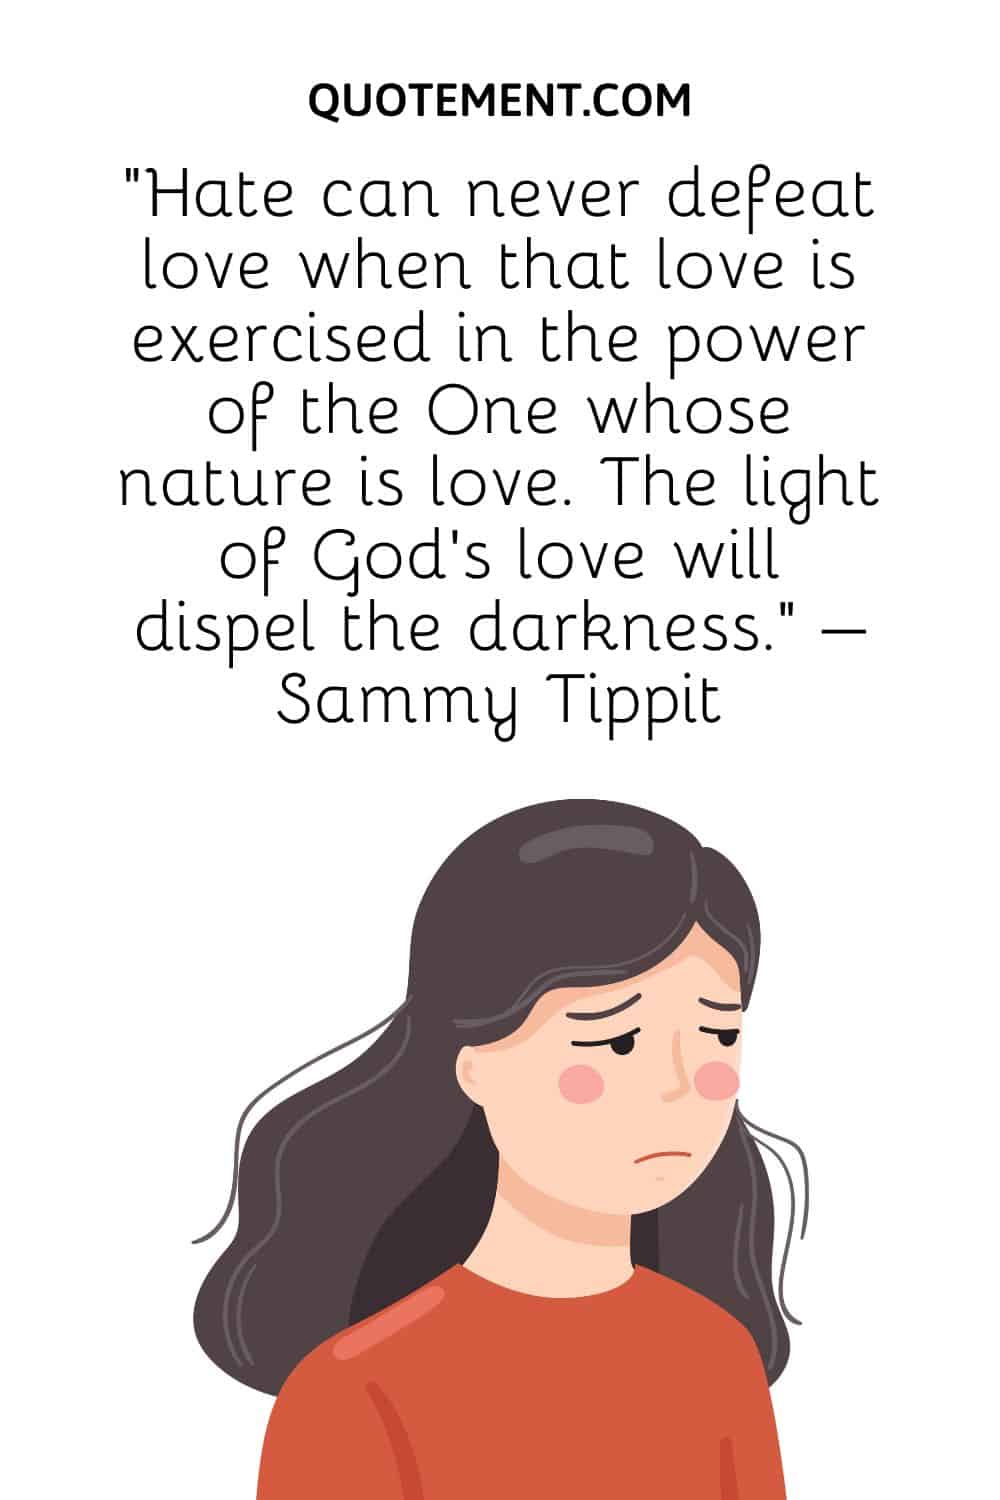 “Hate can never defeat love when that love is exercised in the power of the One whose nature is love. The light of God's love will dispel the darkness.“ – Sammy Tippit